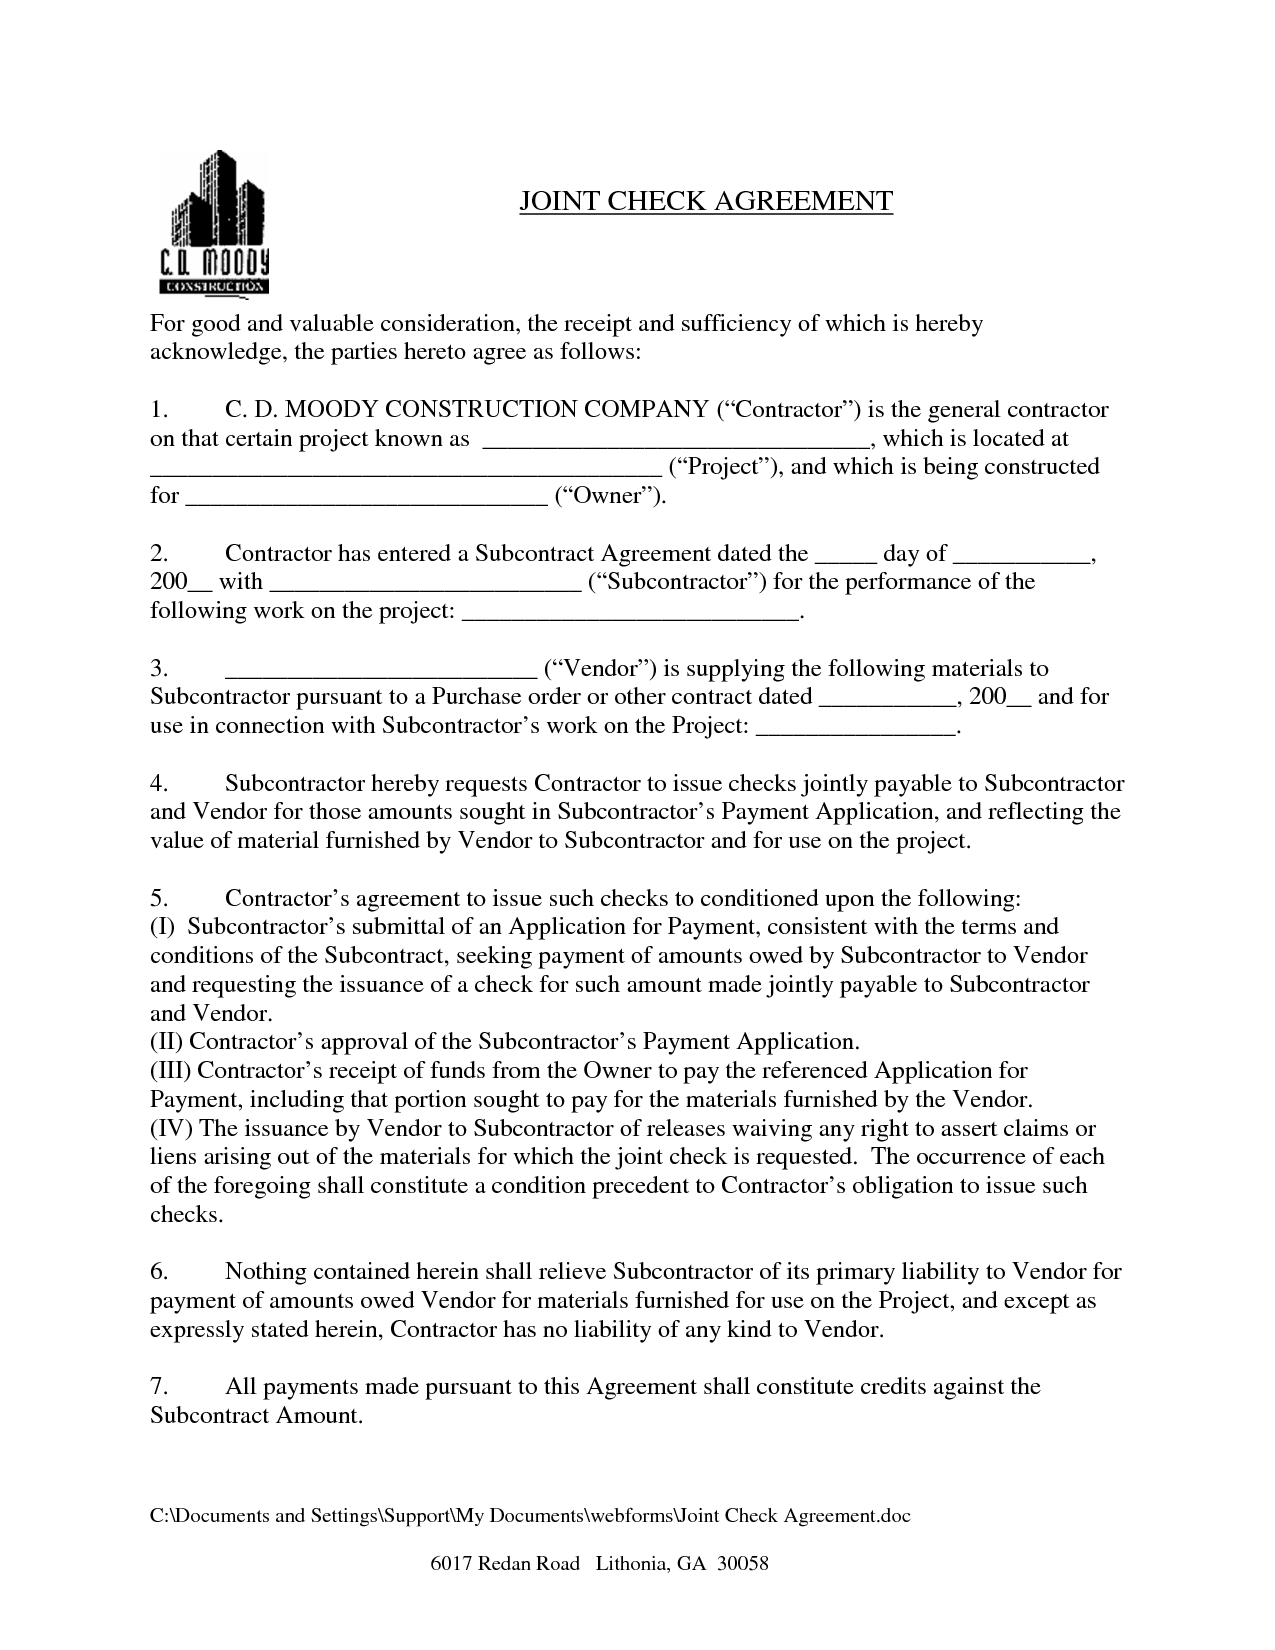 Joint Check Agreement Fill Online, Printable, Fillable, Blank 